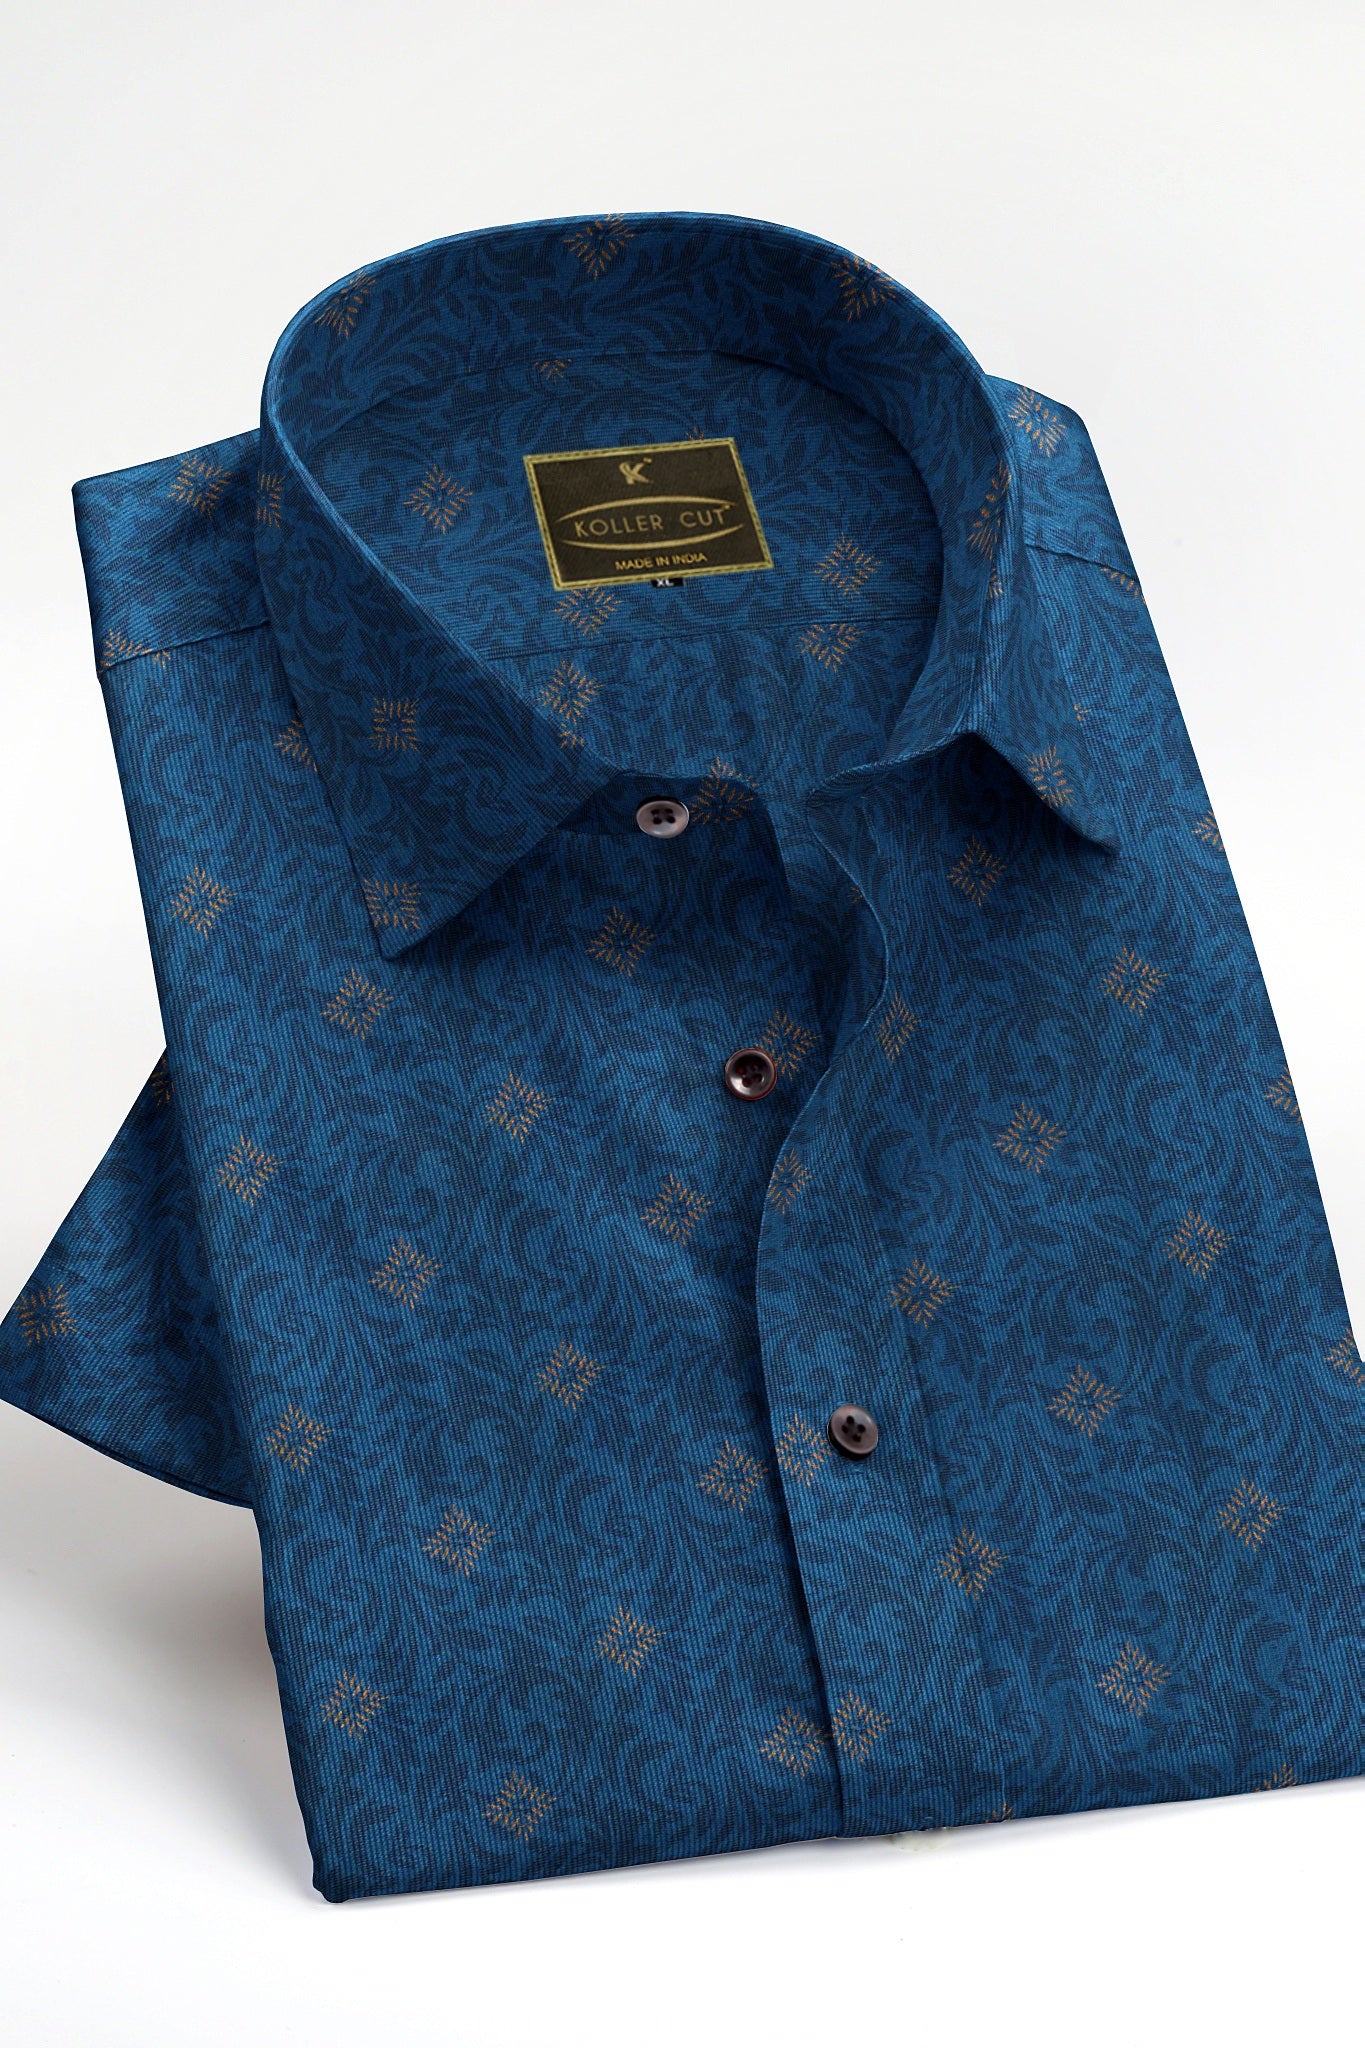 Steel Blue with Navy Floral Printed Mens Cotton Shirt